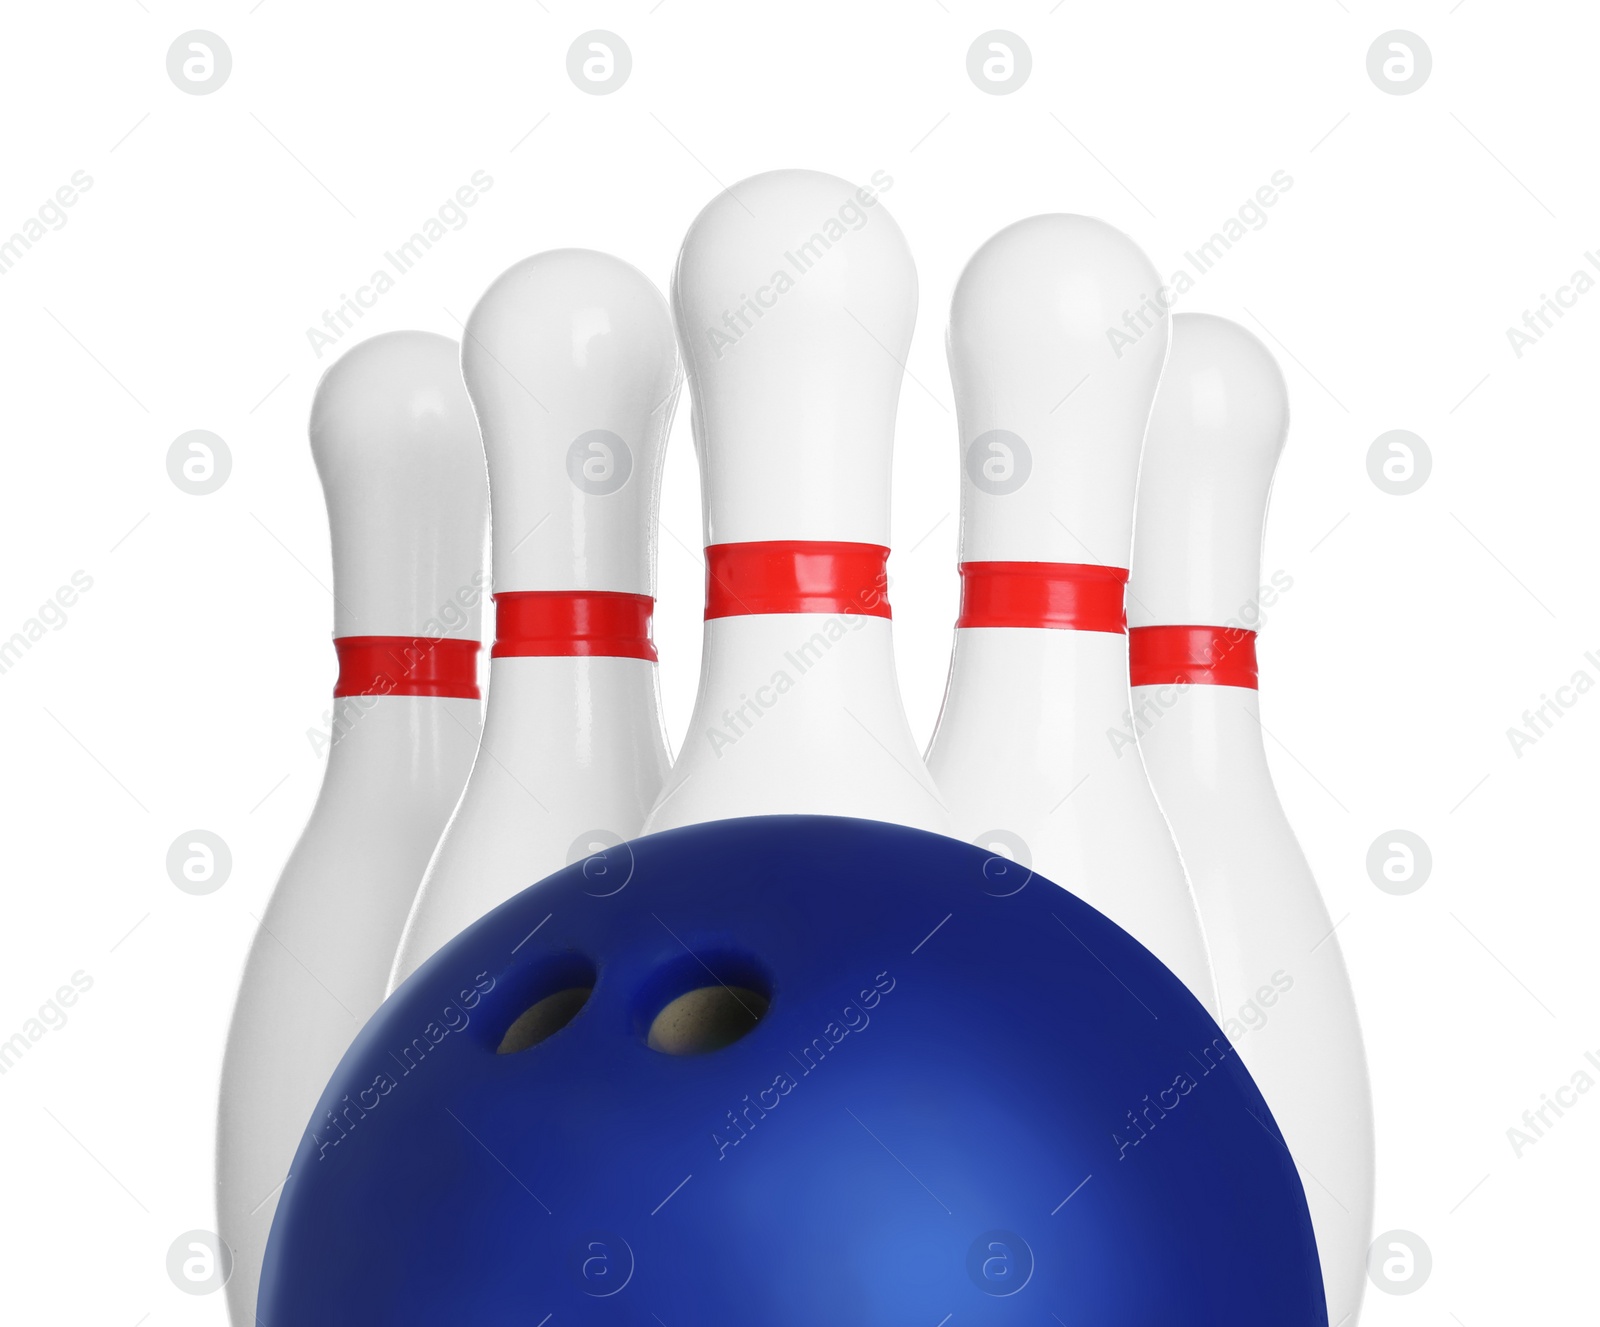 Image of Blue bowling ball and pins on white background